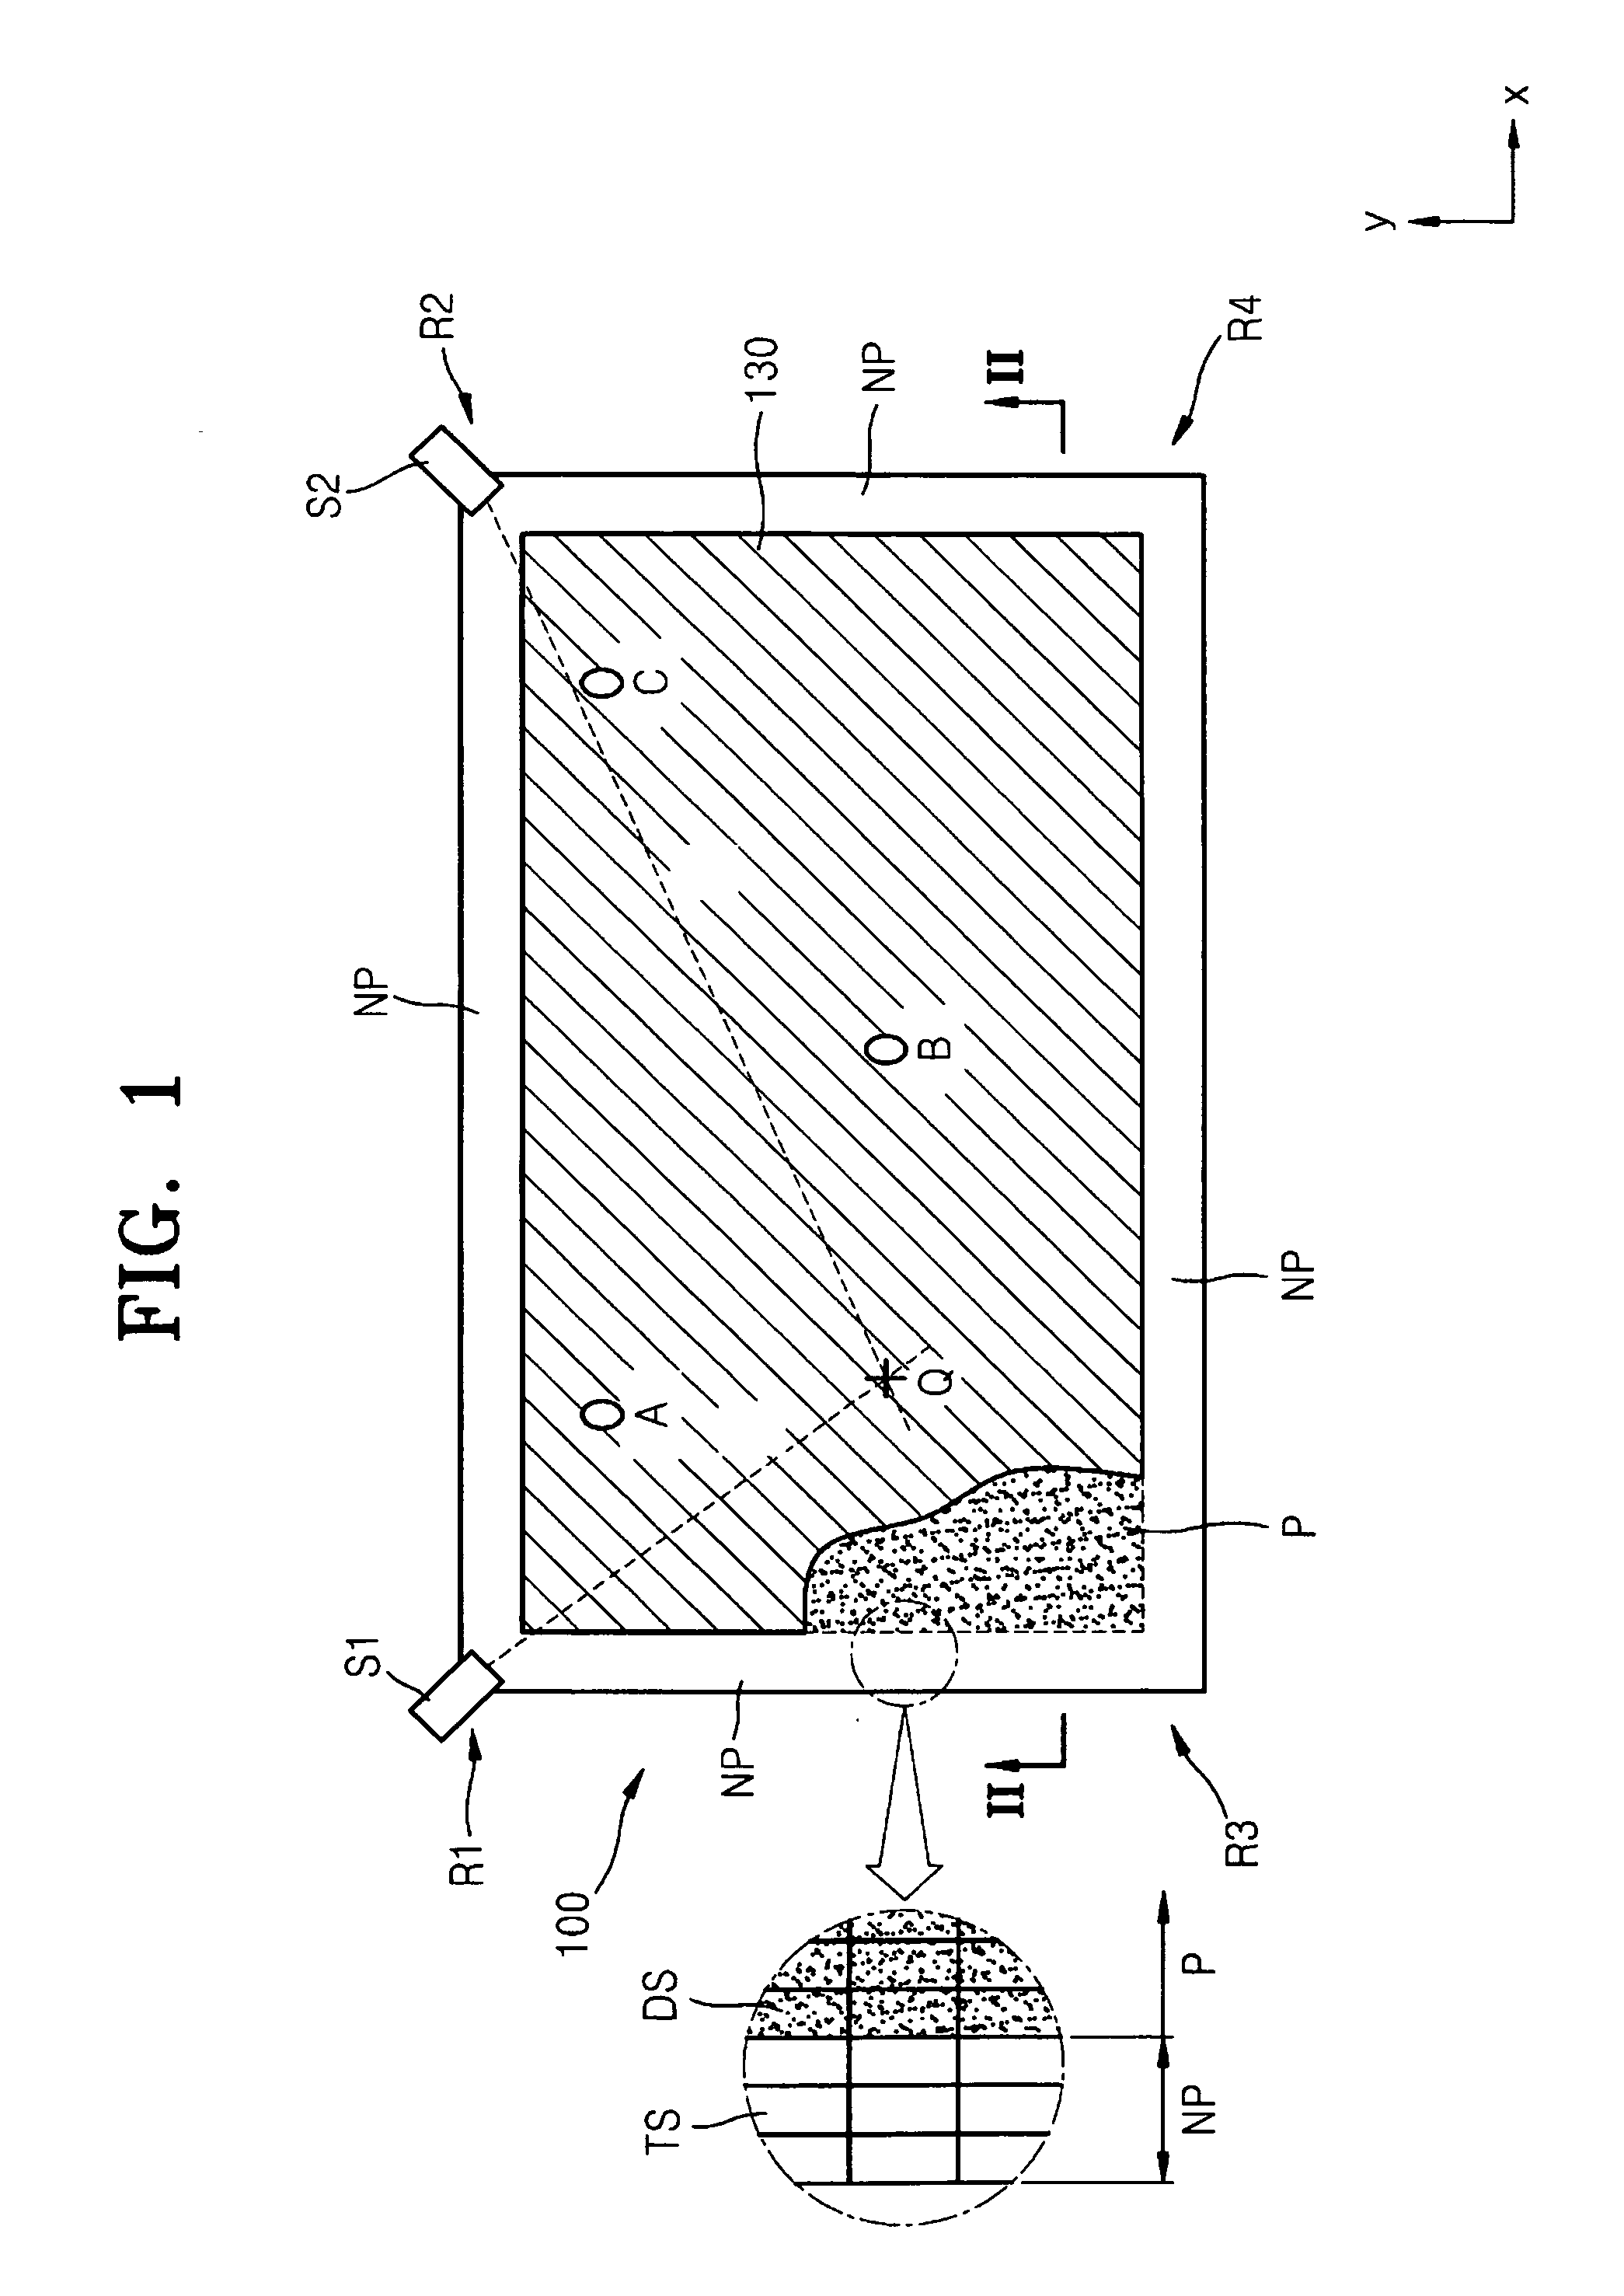 Display device having touch screen function